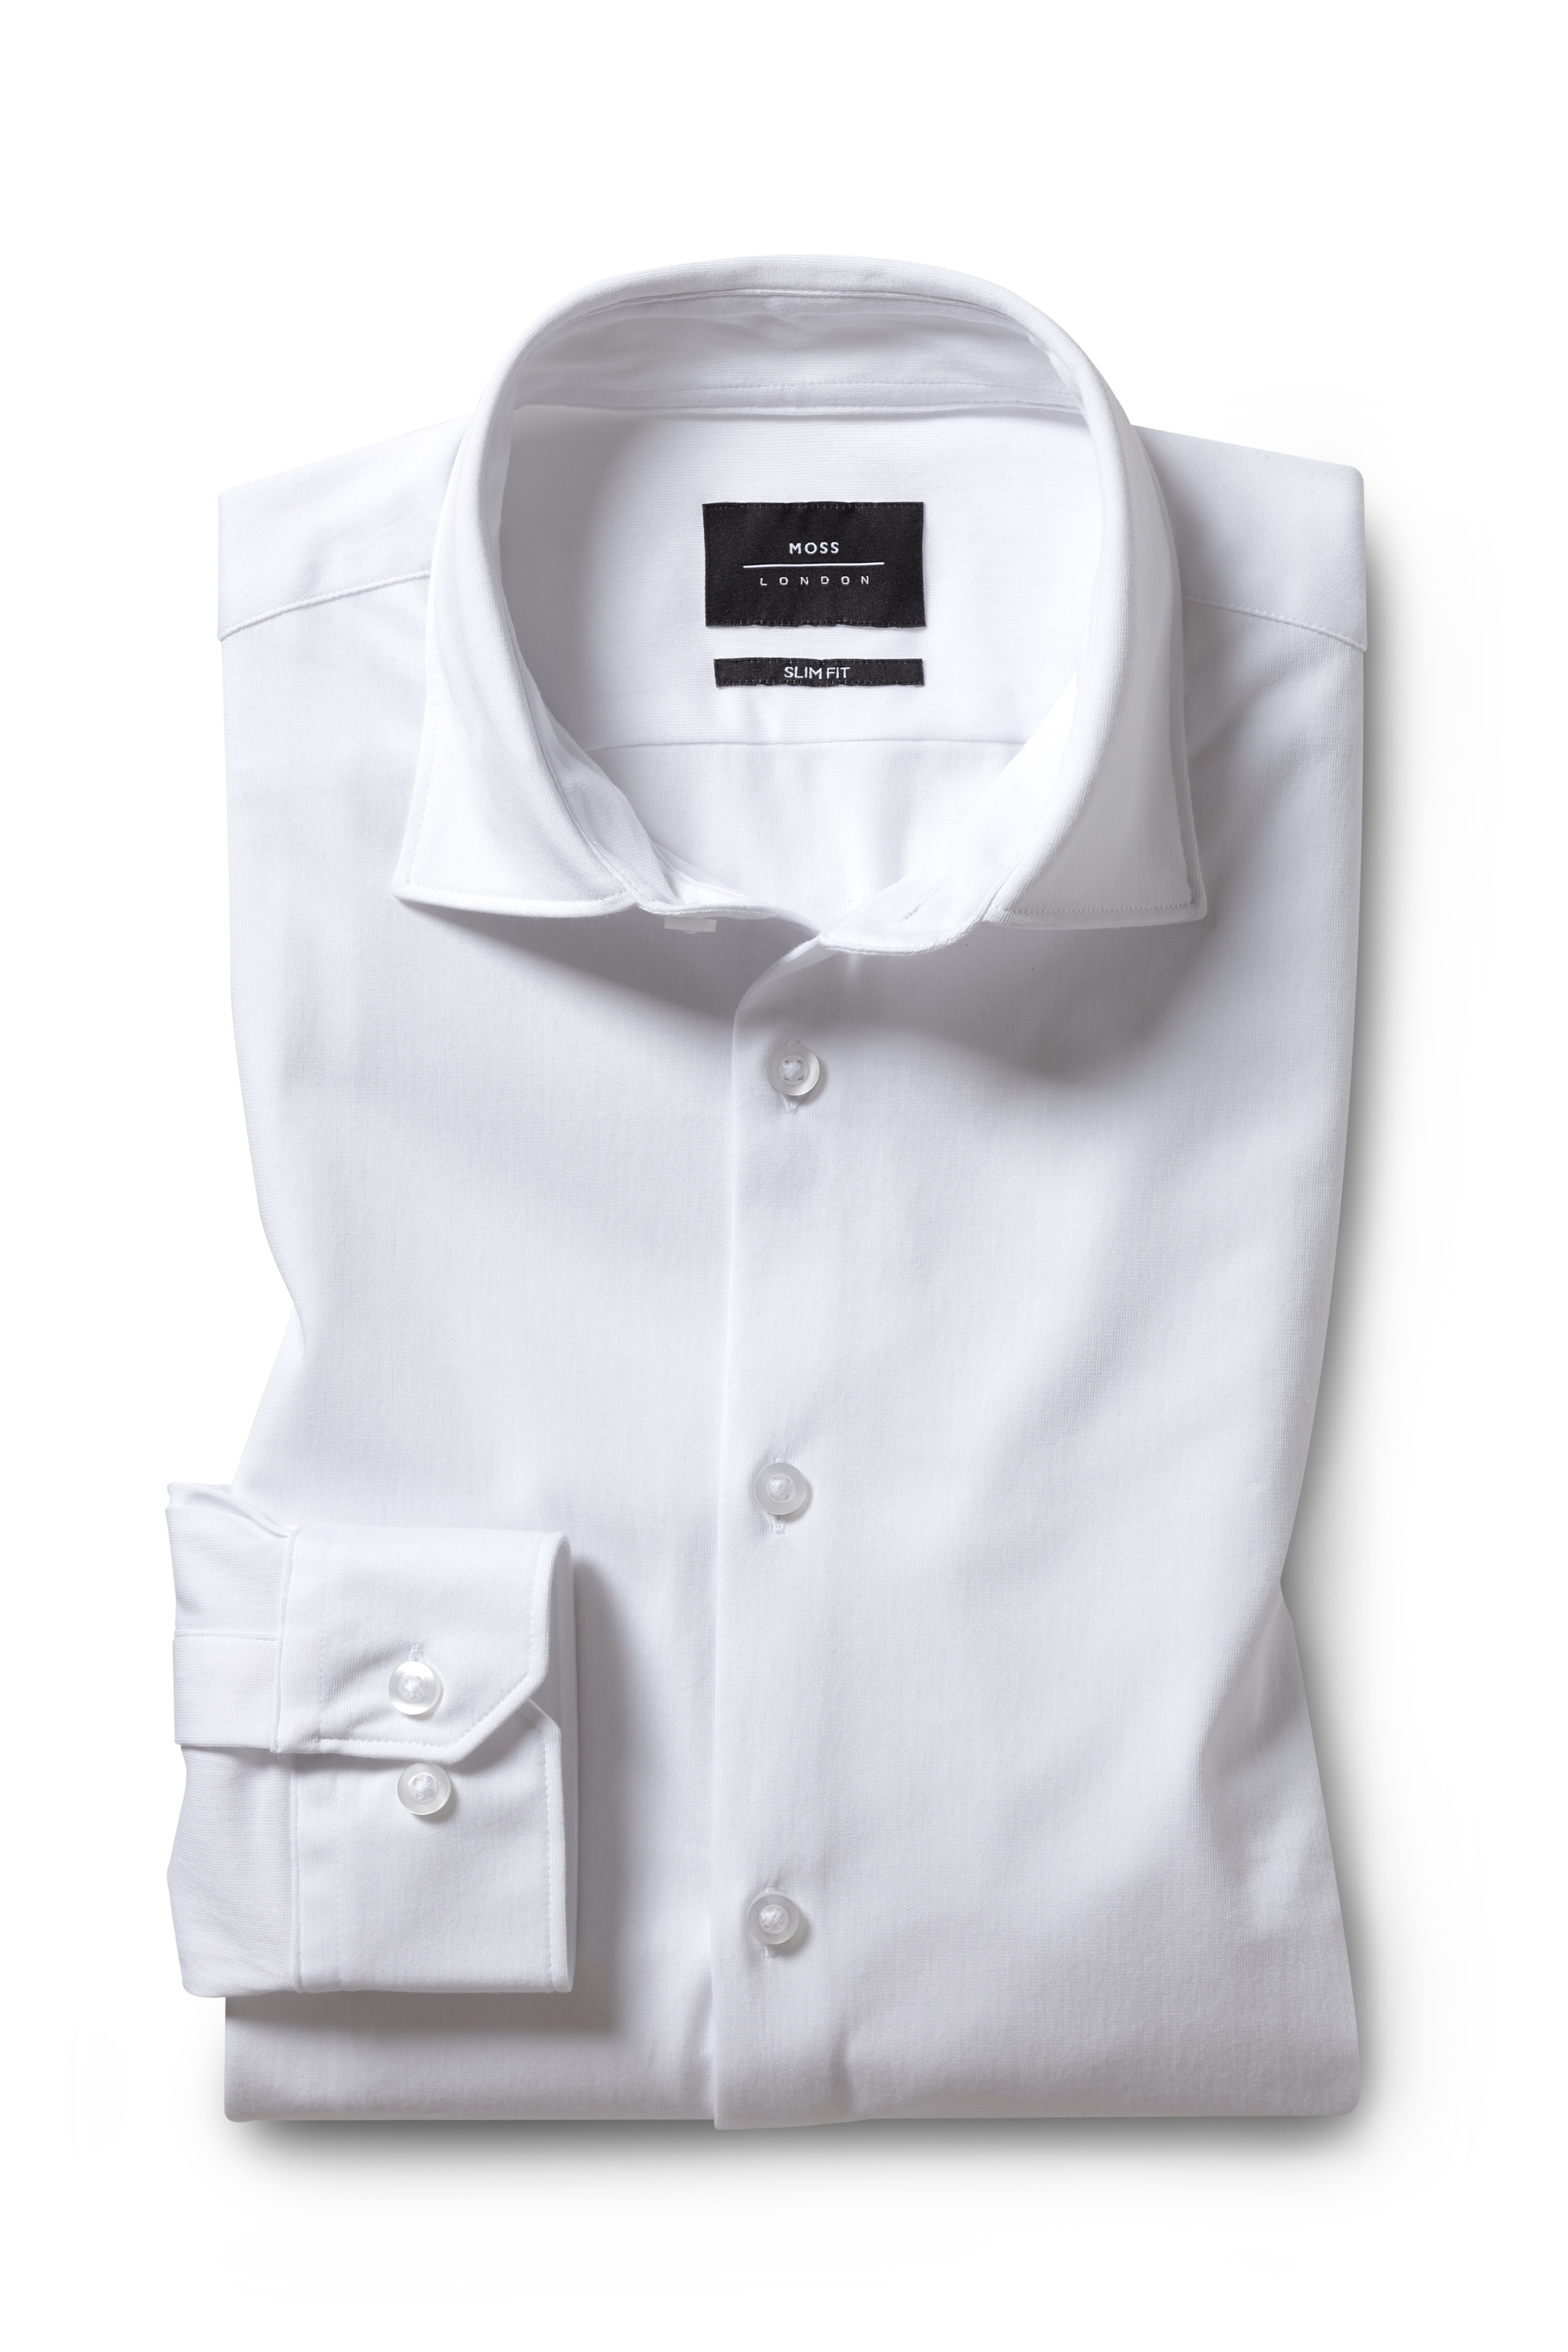 Slim Fit White Comfort Stretch Shirt | Buy Online at Moss